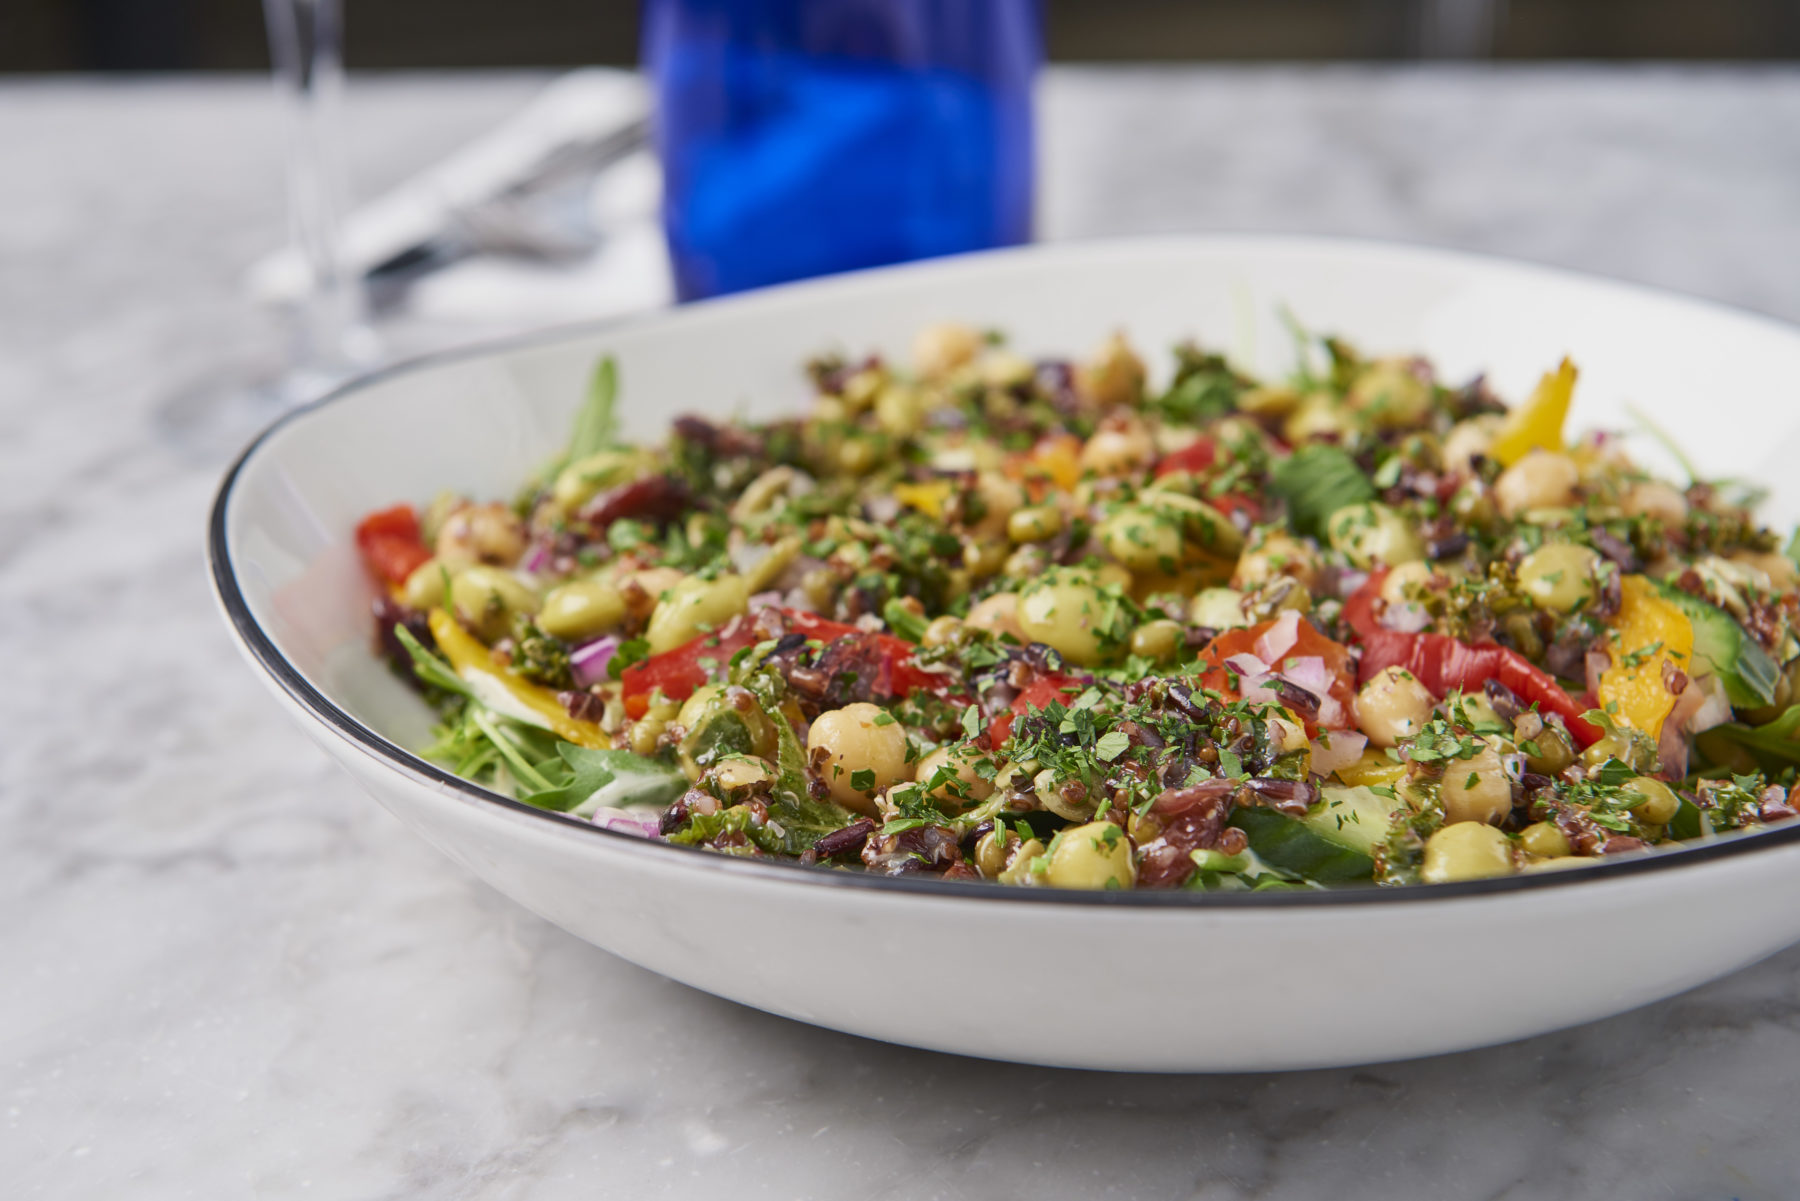 Superfood Salad by Pizza Express